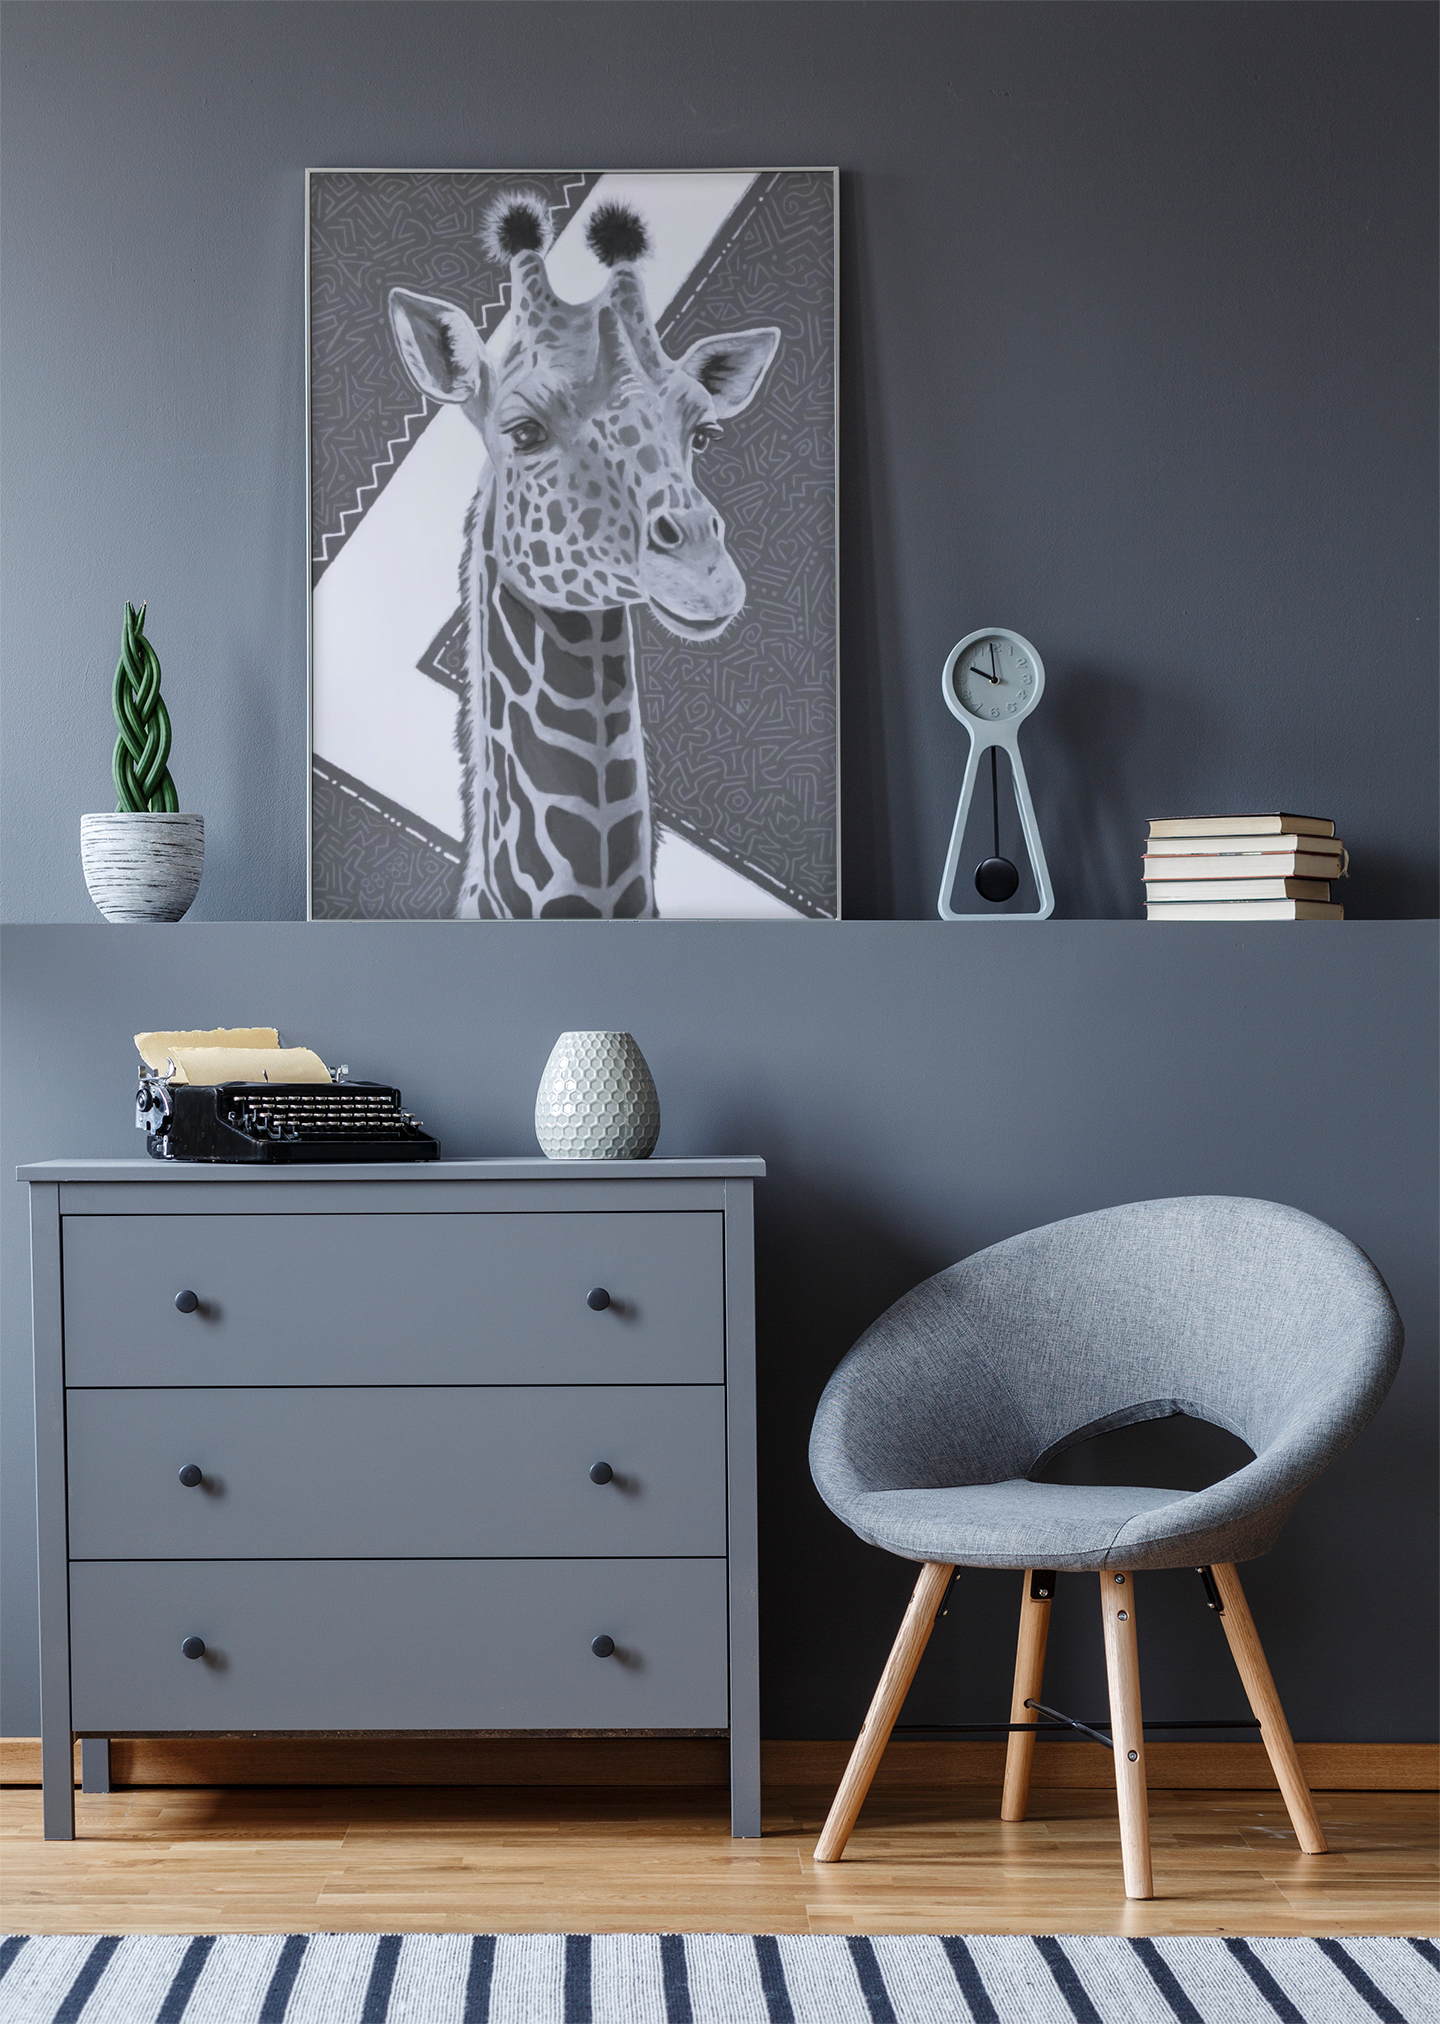 Black and White Canvas print of an original acrylic painting with gold leaf, of a majestic giraffe, with geometric background, leaning up against the wall on a shelf in a bedroom/living room